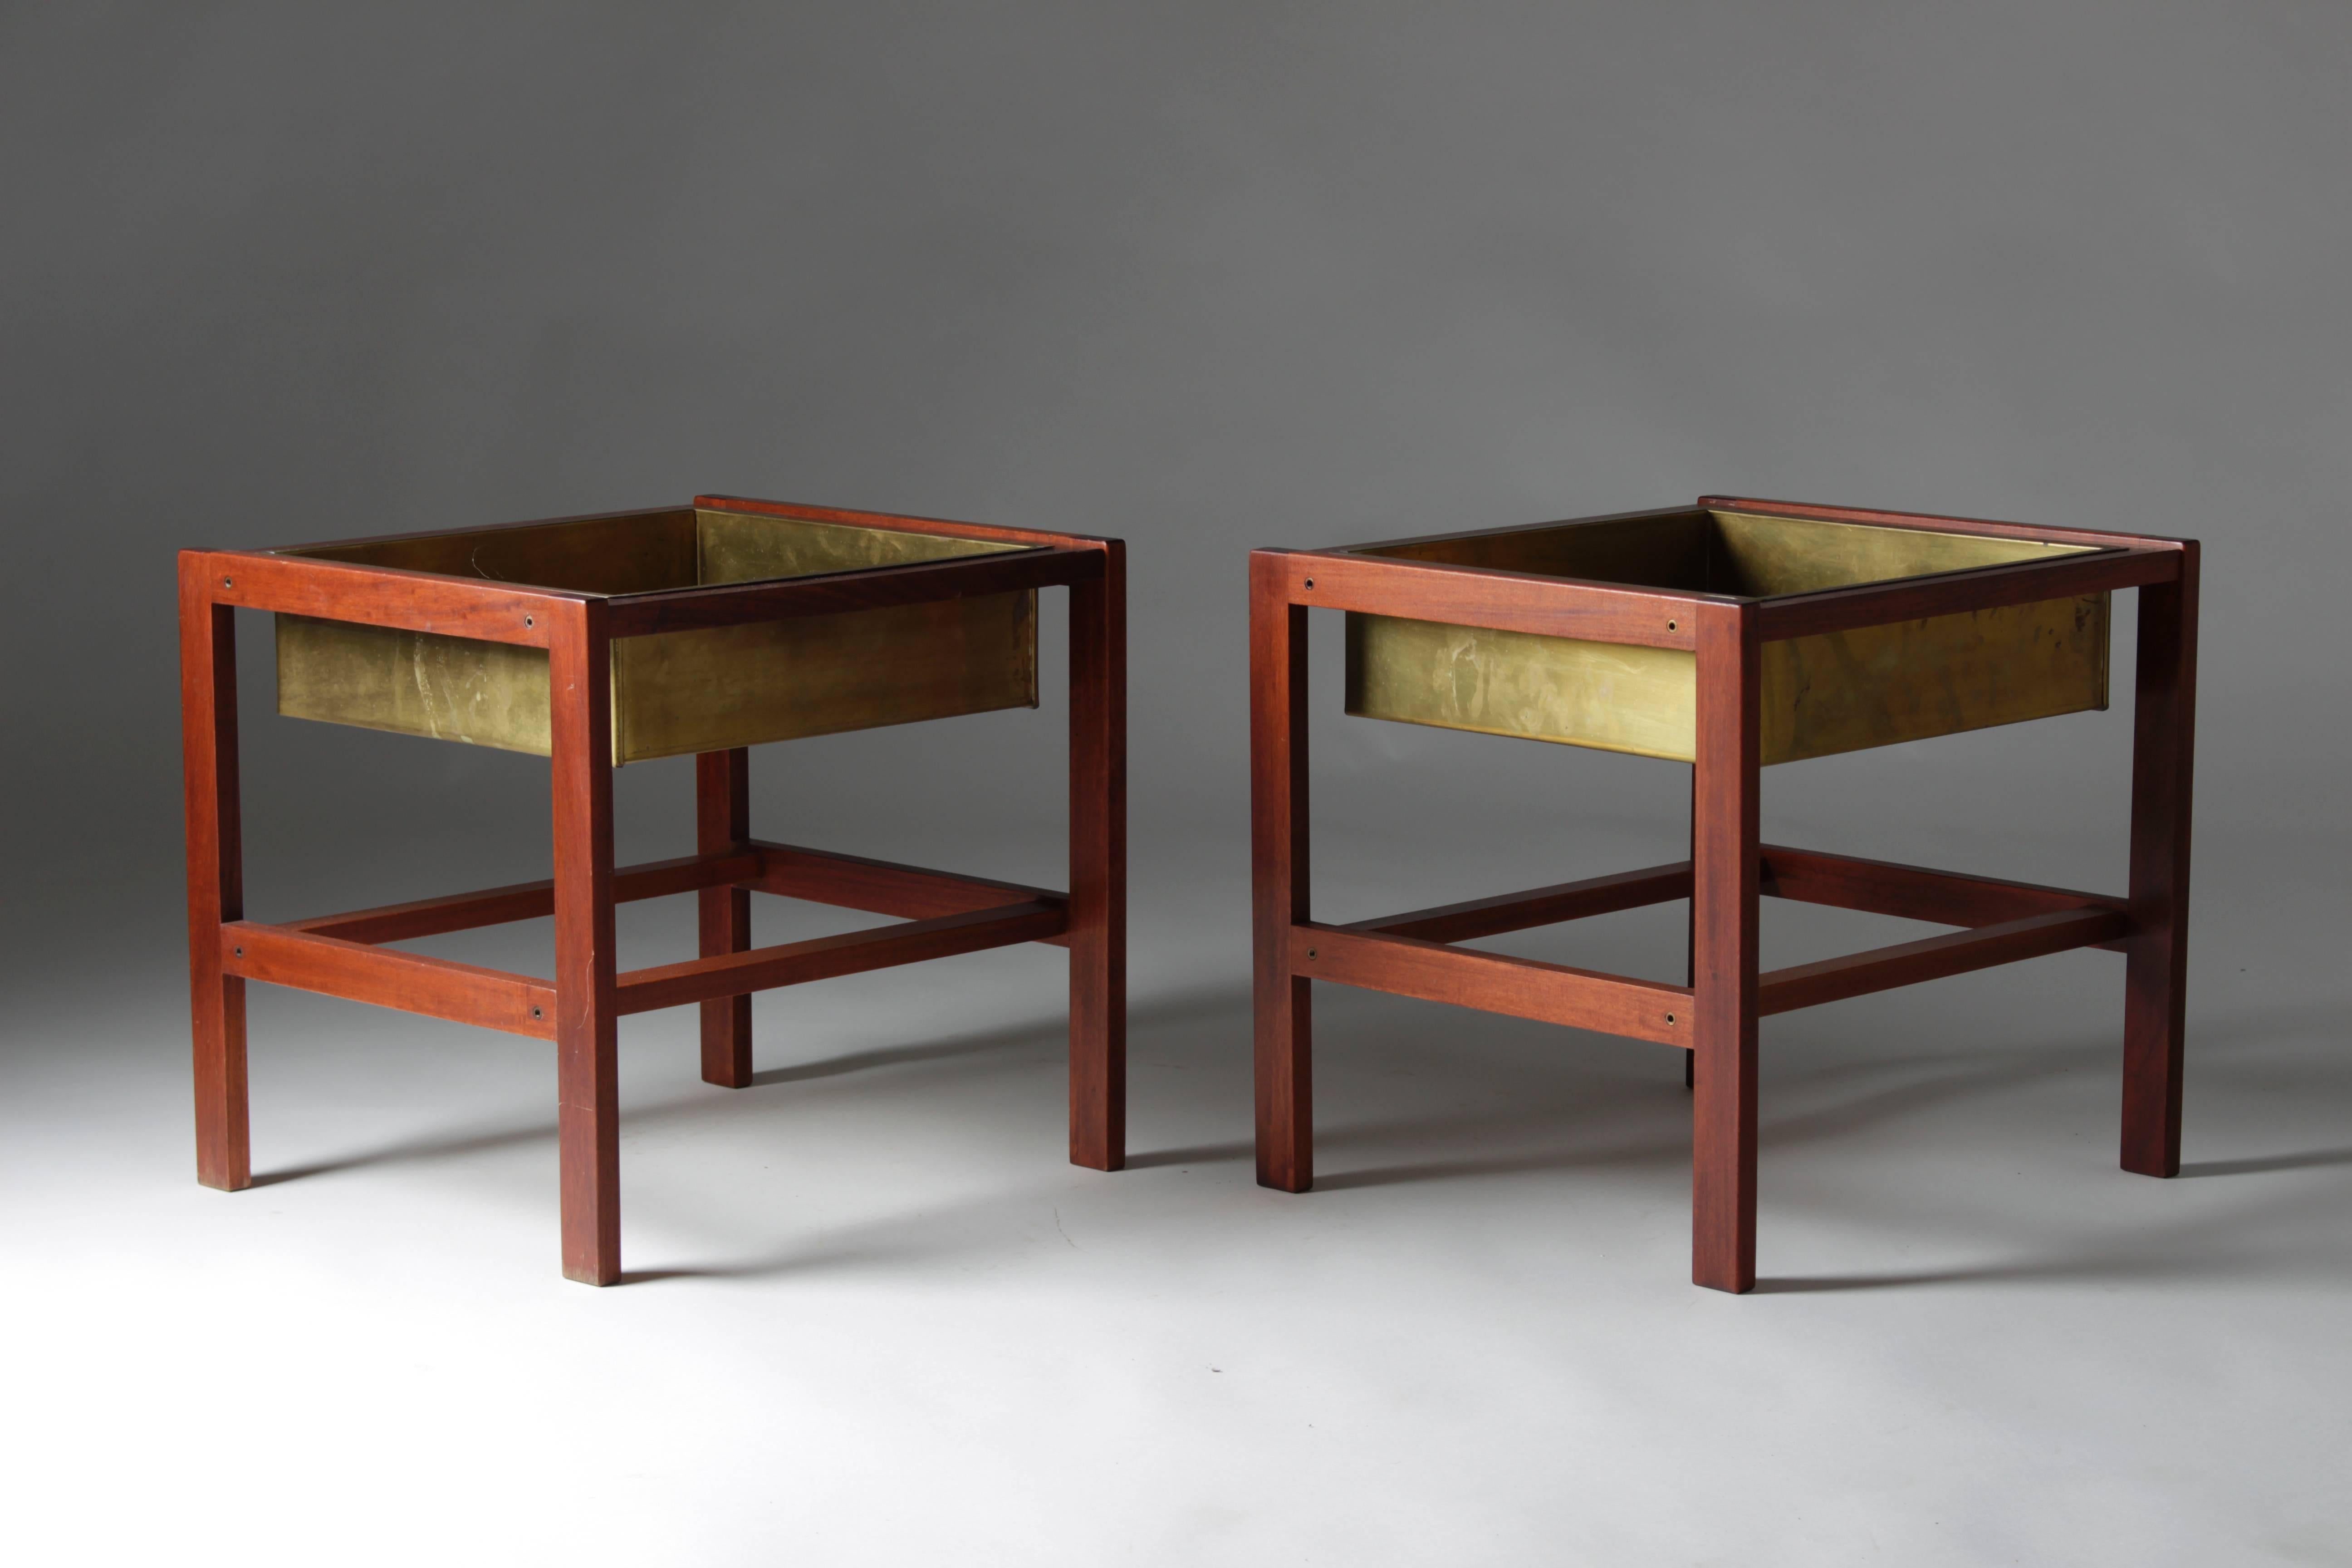 A pair of beautiful side tables with a frame made of dark teak and trays in solid natural patinated brass. Probably manufactured in Scandinavia.
